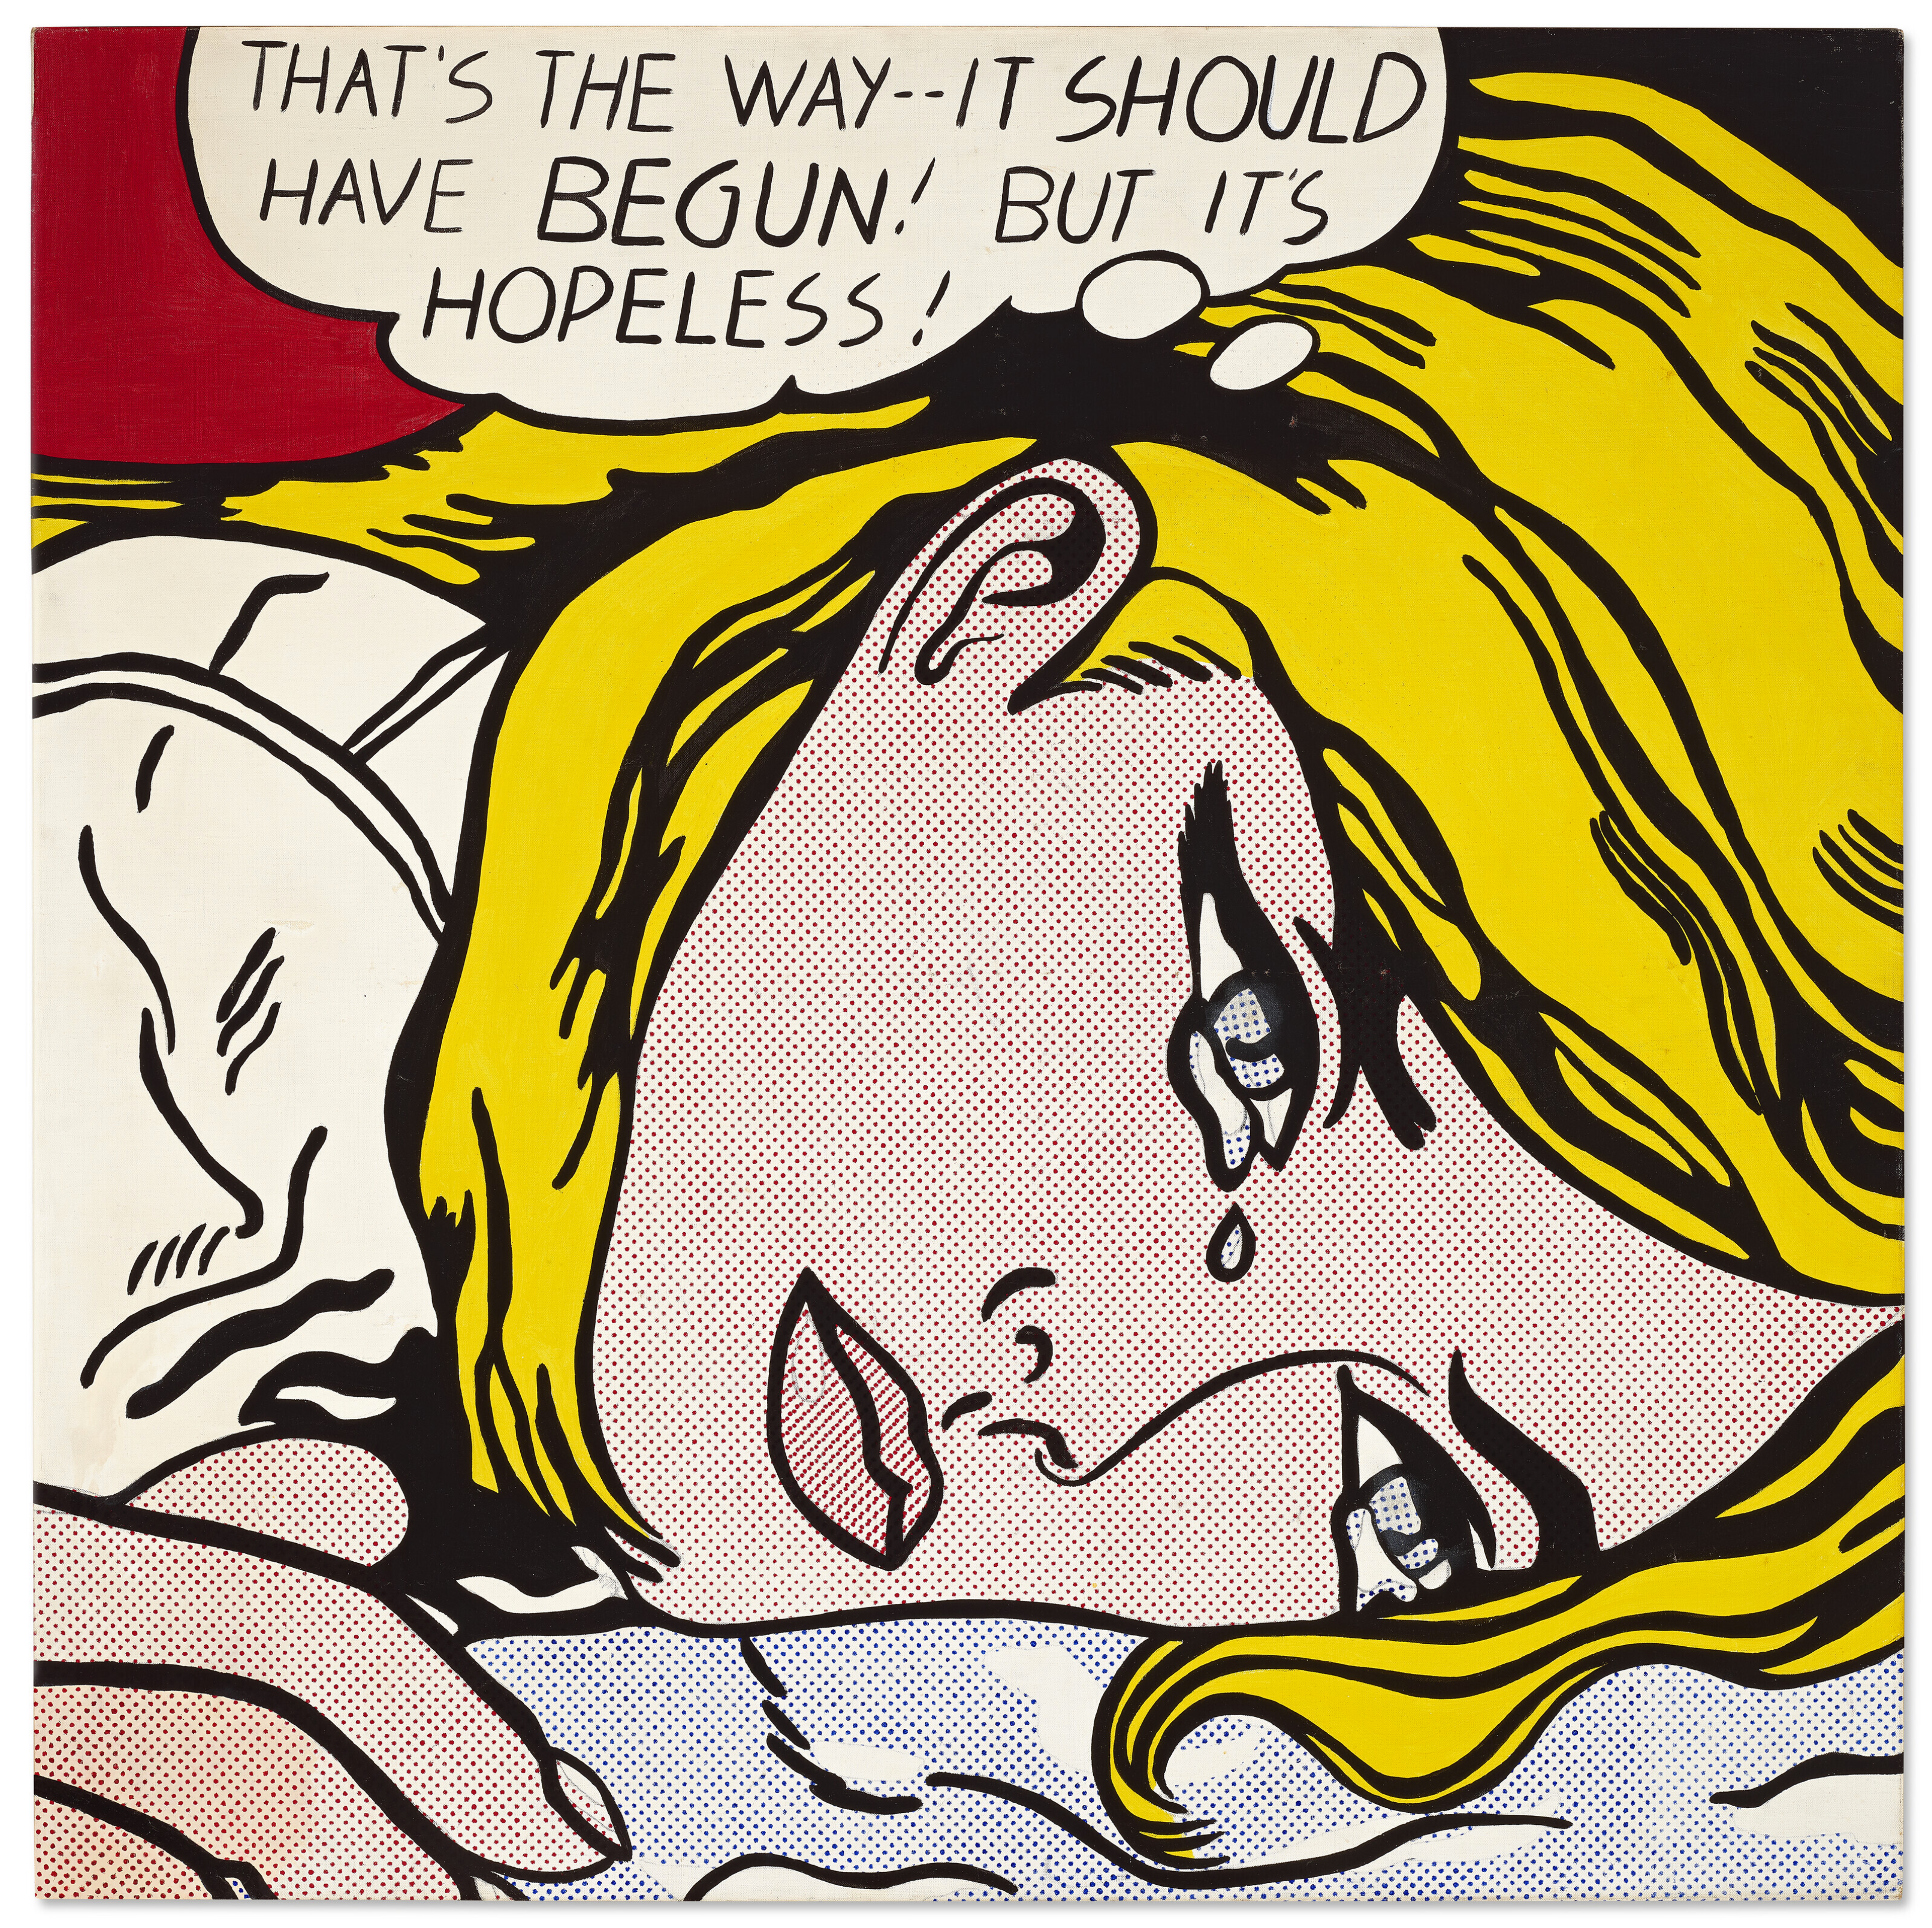 Hopeless is a typical example of Lichtenstein's Romance comics with its teary-eyed face and dejected woman filling the majority of the canvas. A woman is shown crying, with a thought bubble that reads: "That's the way it should have begun! But it's hopeless!"